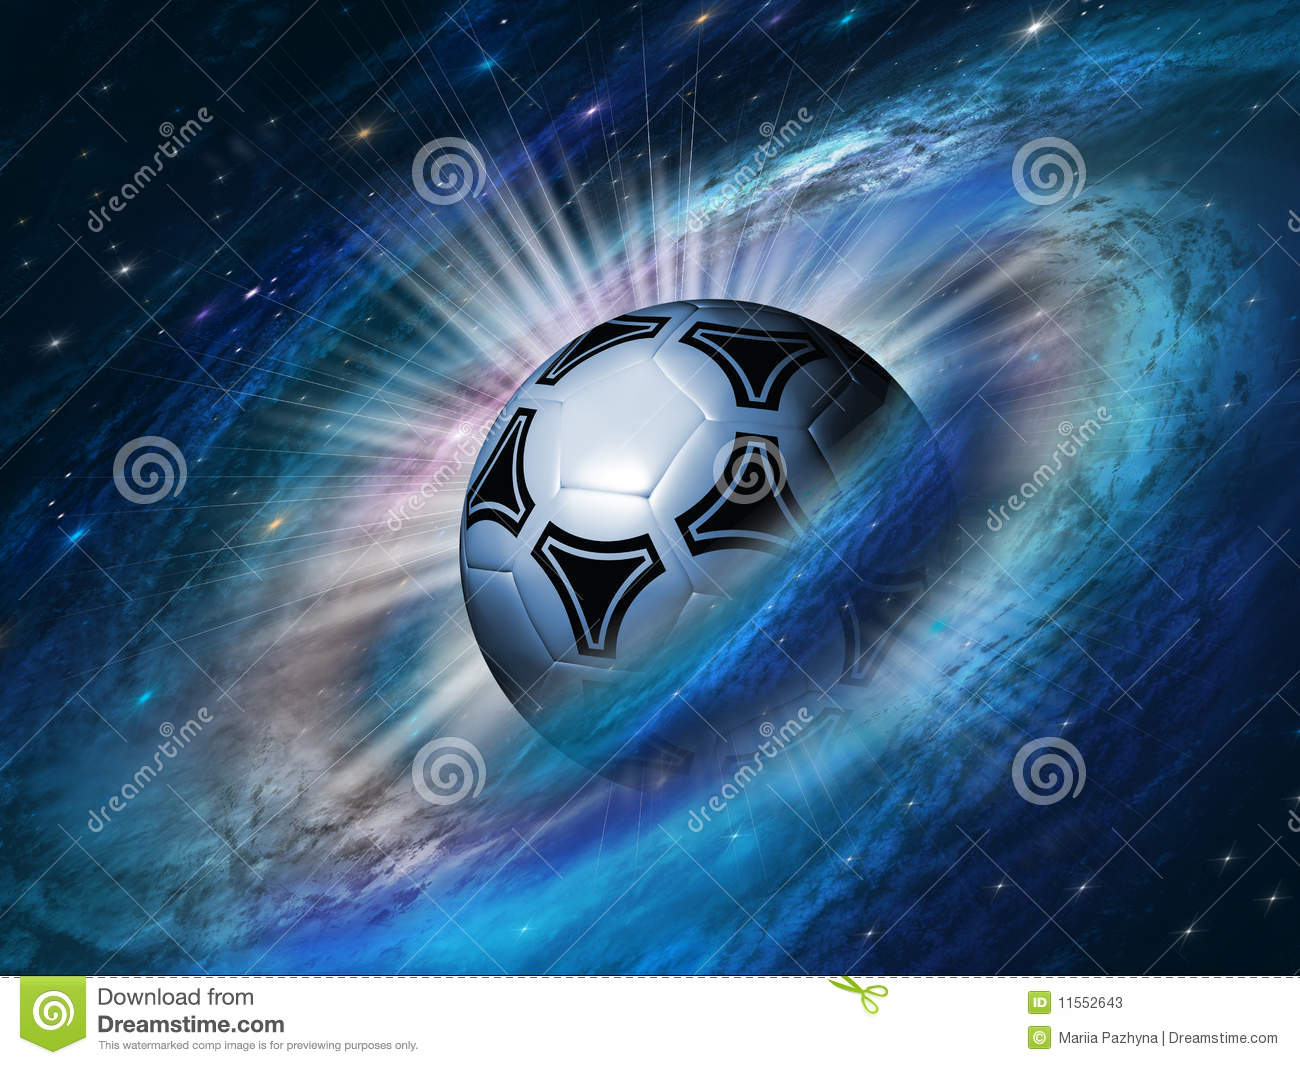 Cool Soccer Ball Backgrounds Cosmos background with a